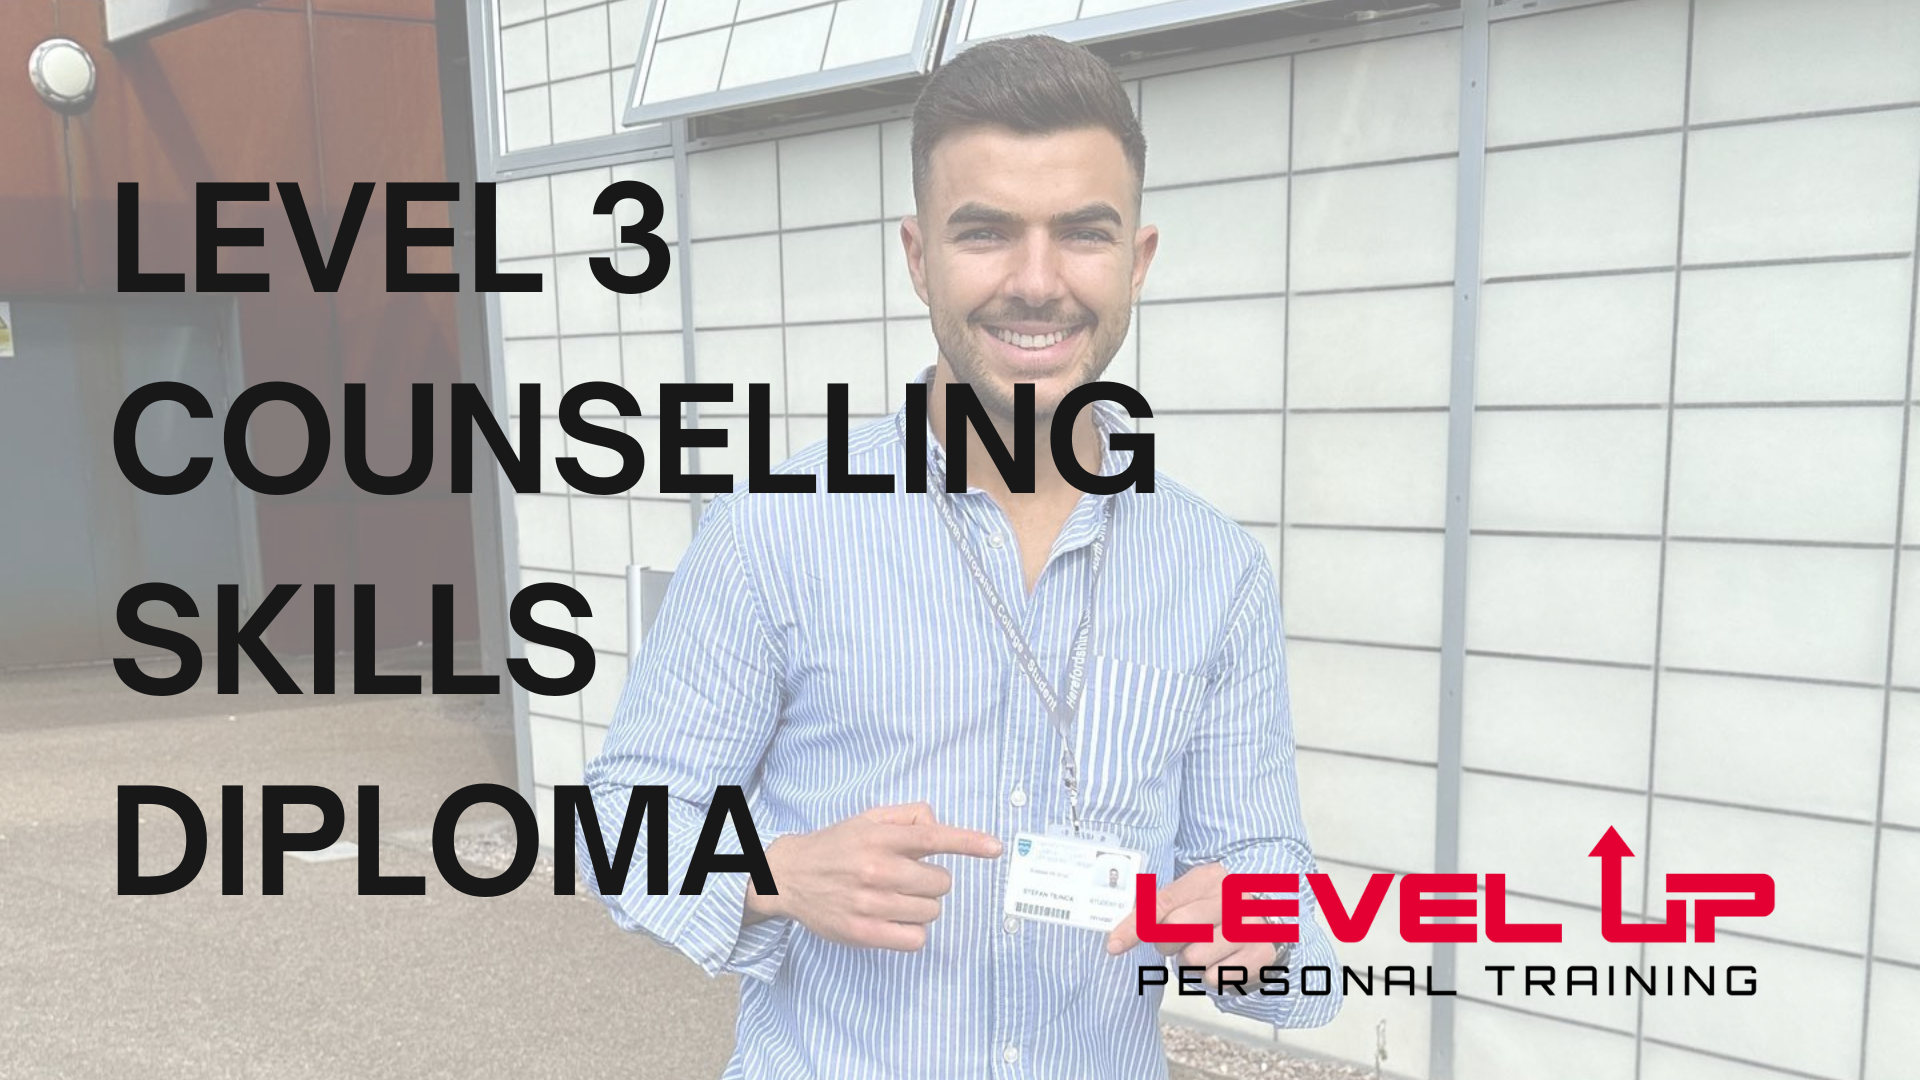 Level 3 Counselling Skills Diploma